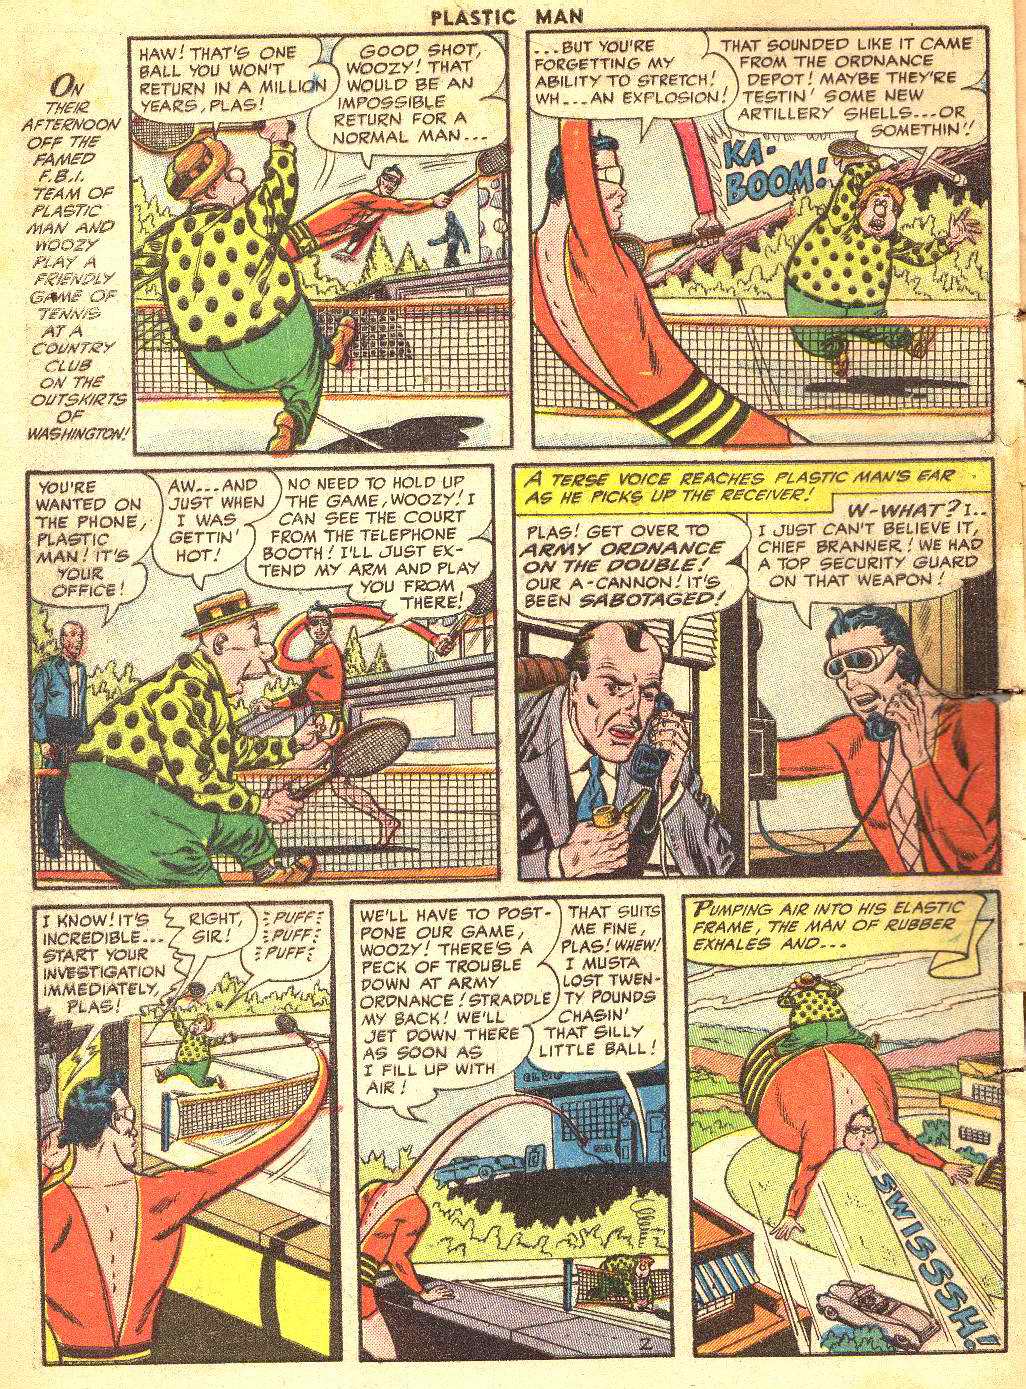 Plastic Man (1943) issue 51 - Page 4